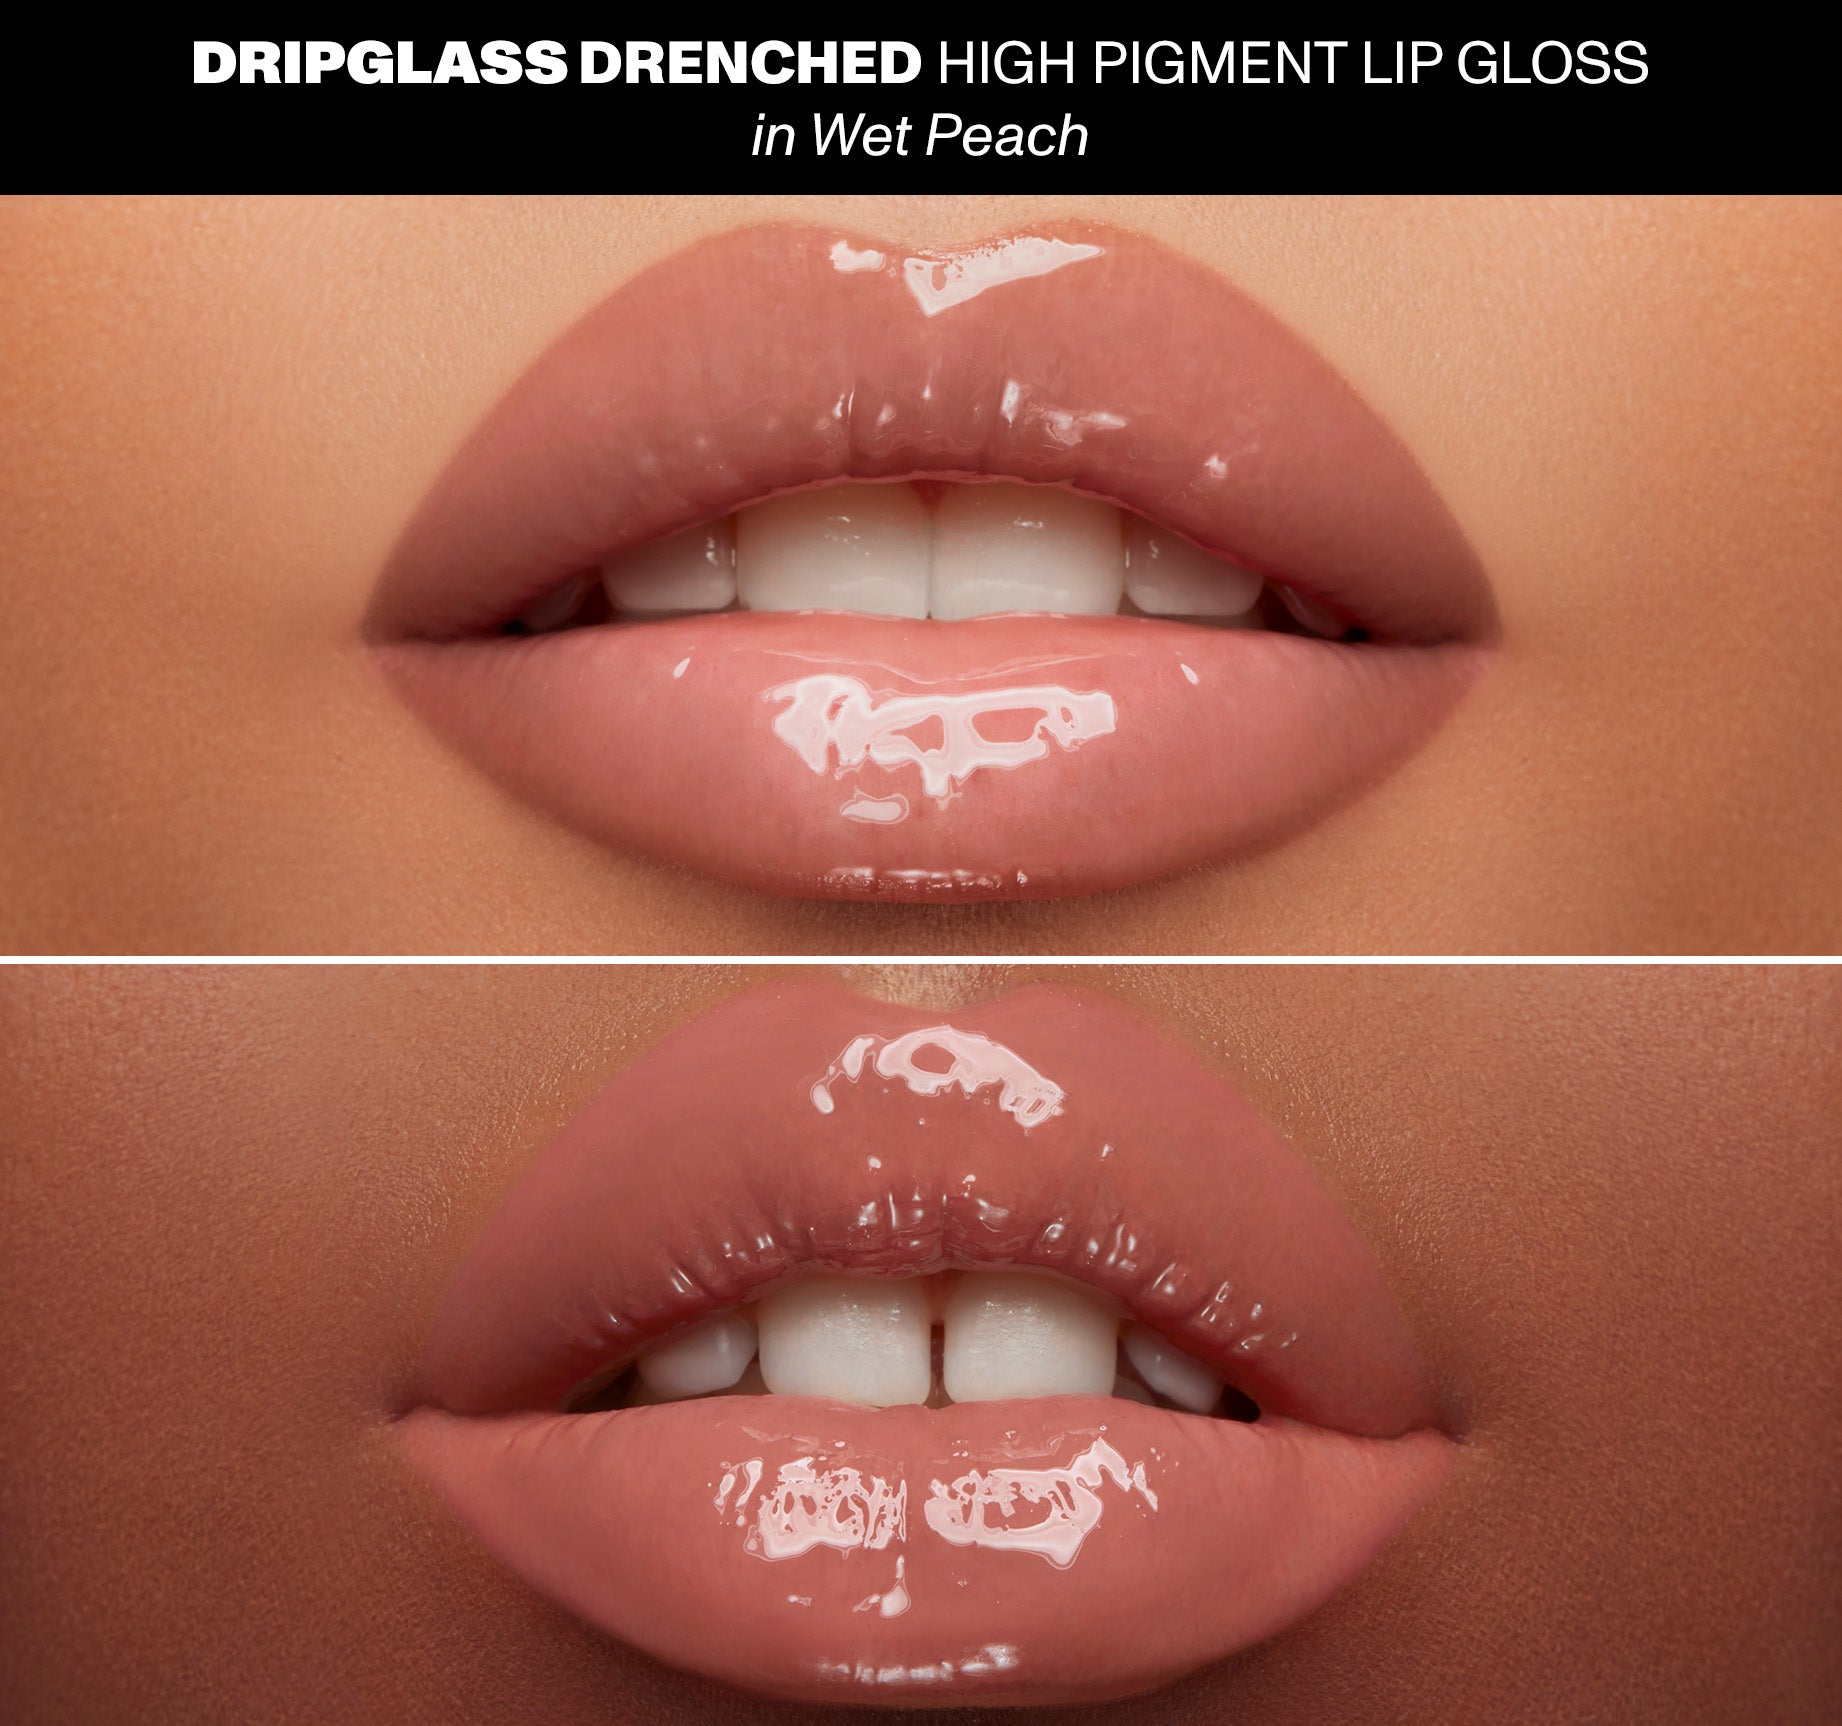 Dripglass Drenched High Pigment Lip Gloss - Wet Peach - Image 3